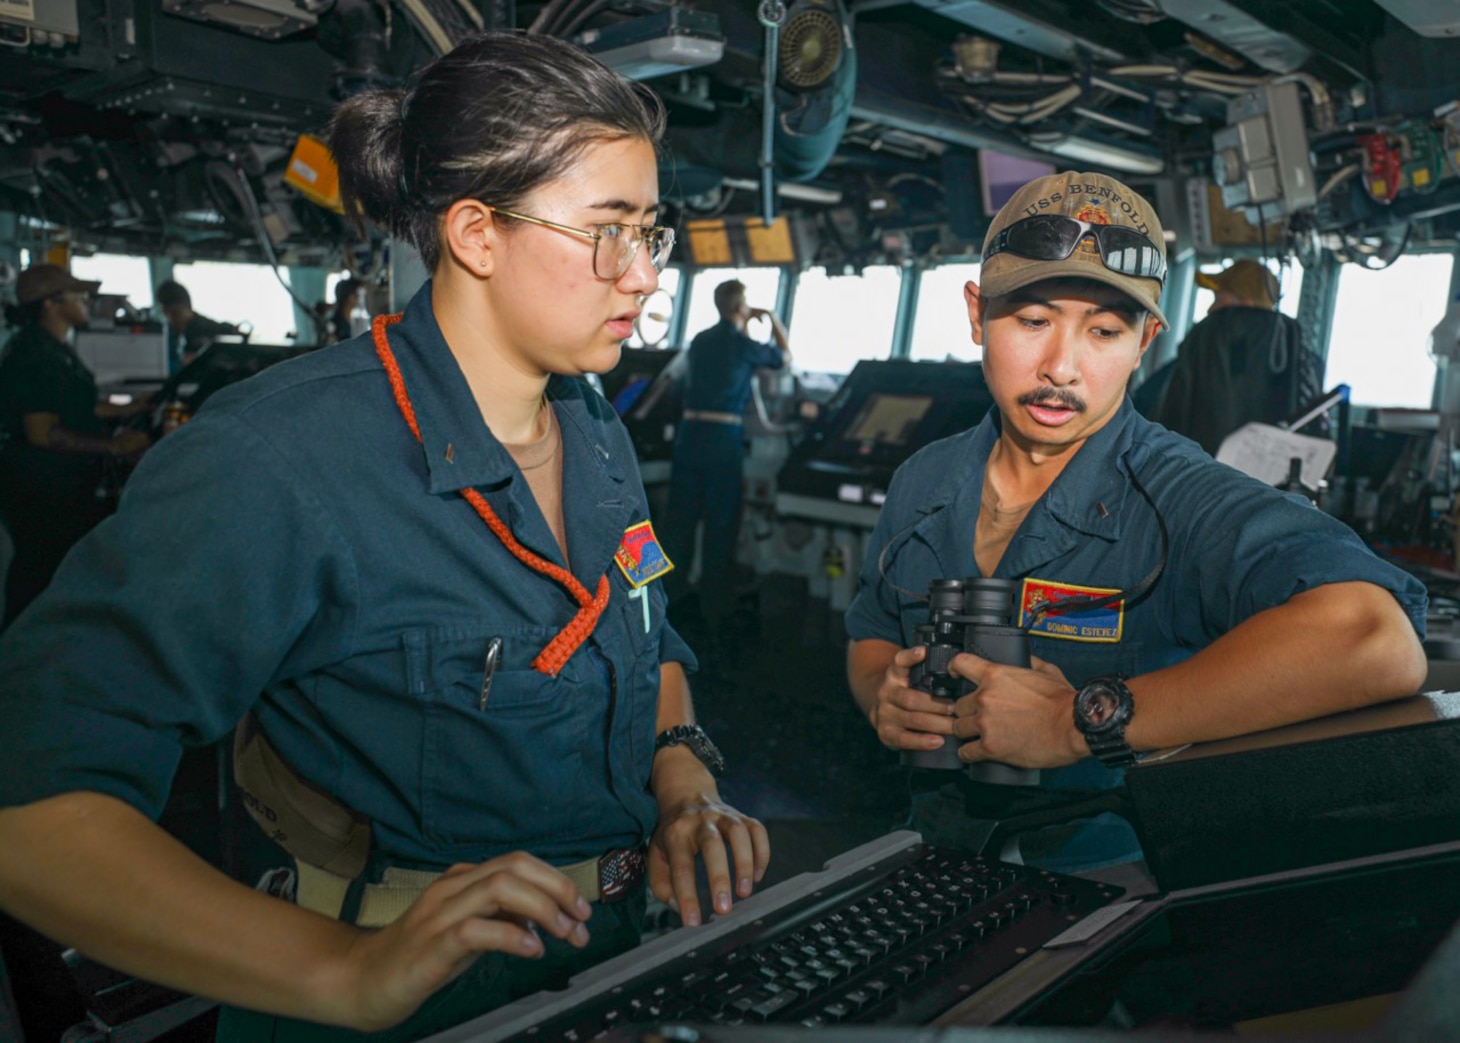 Lt. j.g. Nicole Schiff, left, from Silver Spring, Maryland, and Lt. j.g. Dominic Estevez, right, from San Diego, monitor surface contacts from the pilothouse as the guided-missile destroyer USS Benfold (DDG 65) conducts routine underway operations. Benfold is forward-deployed to the U.S. 7th Fleet area of operations in support of a free and open Indo-Pacific.